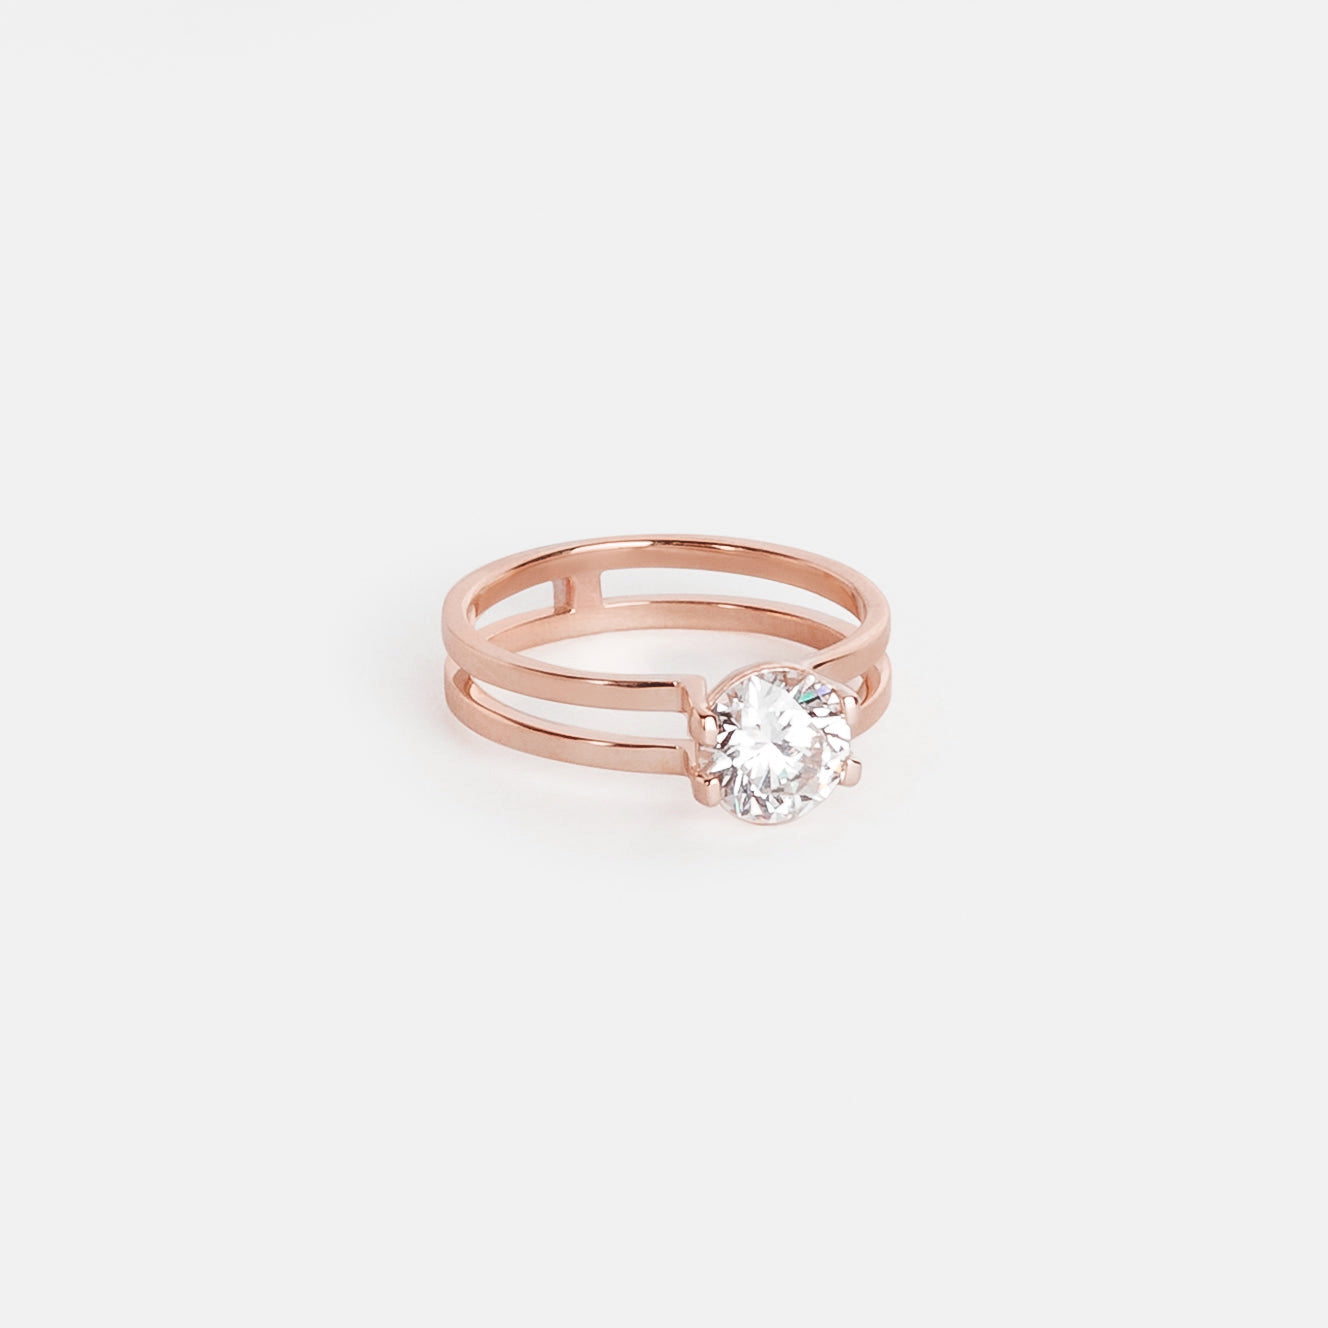 Vedi Unique Ring in 14k Rose Gold set with a 1.01ct round brilliant cut lab-grown diamond By SHW Fine Jewelry NYC